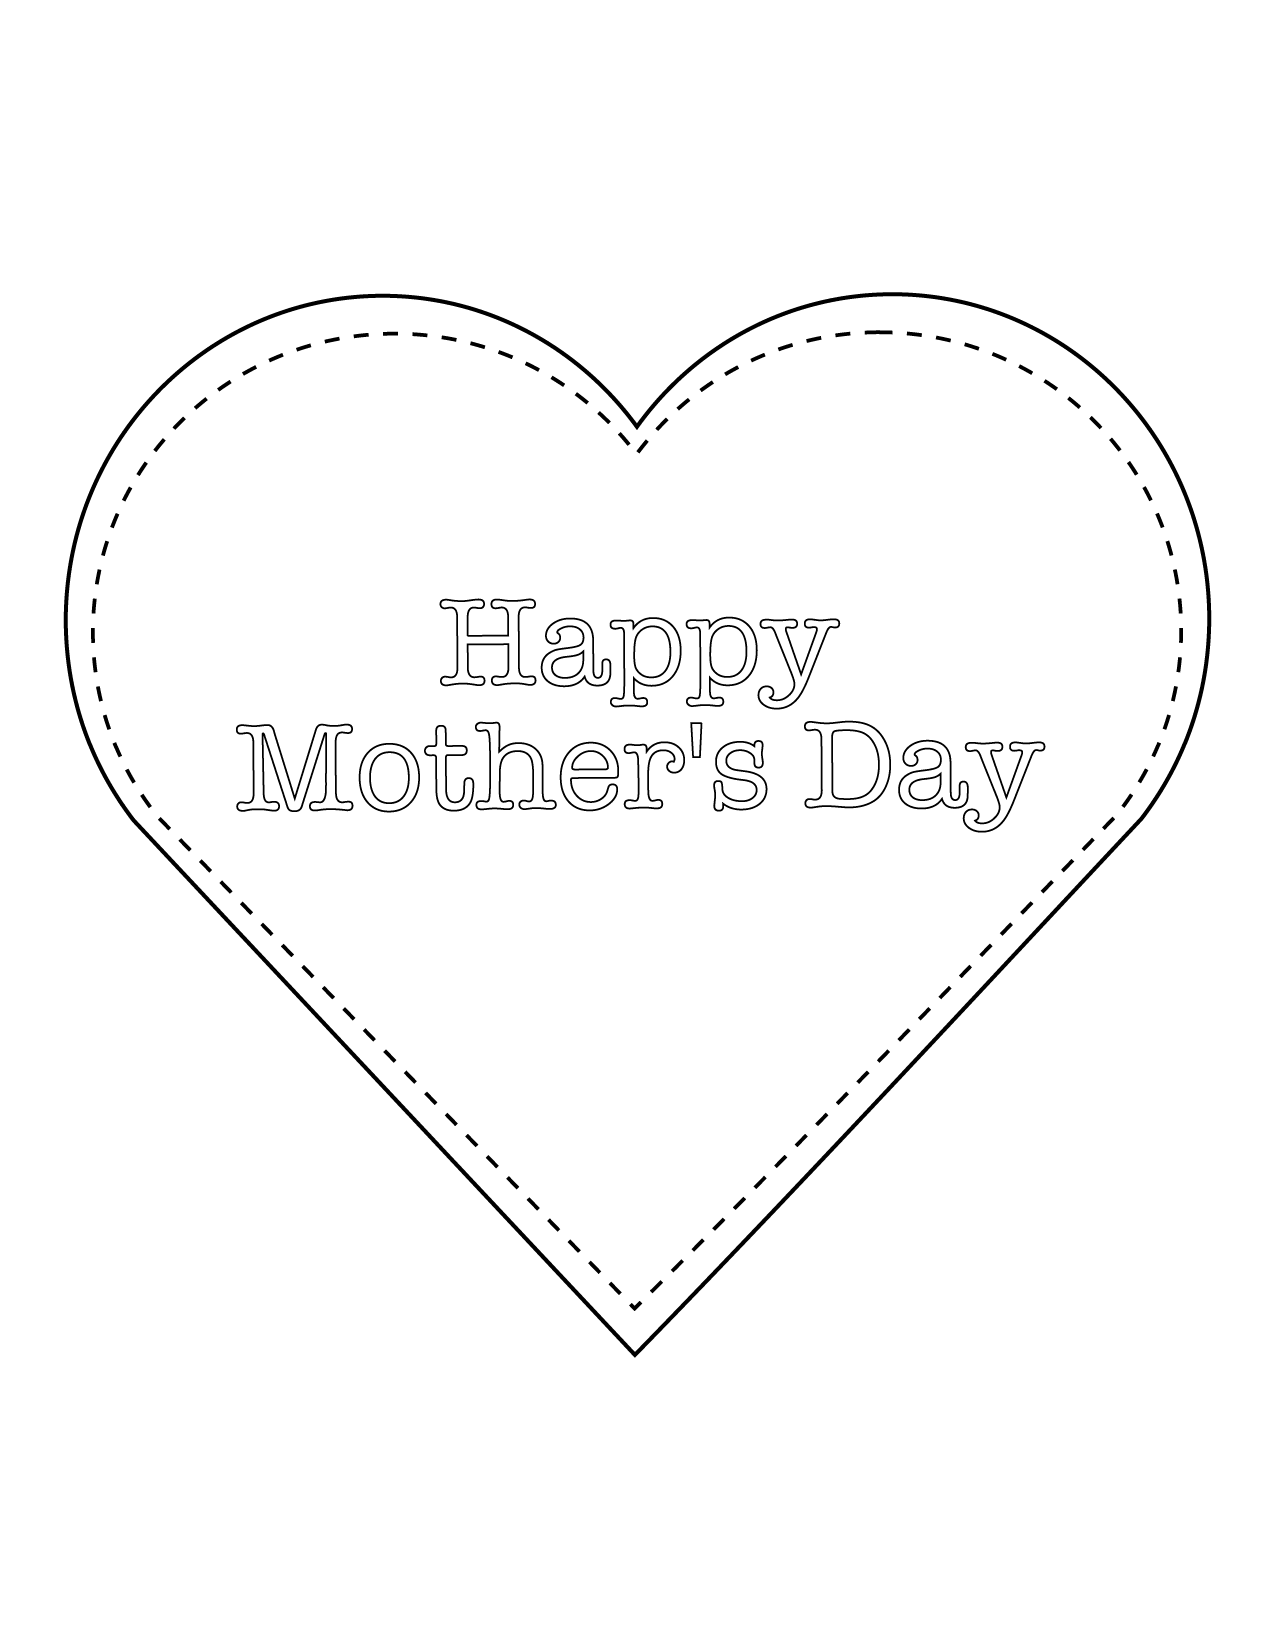 Happy Mothers Day Heart Coloring Page